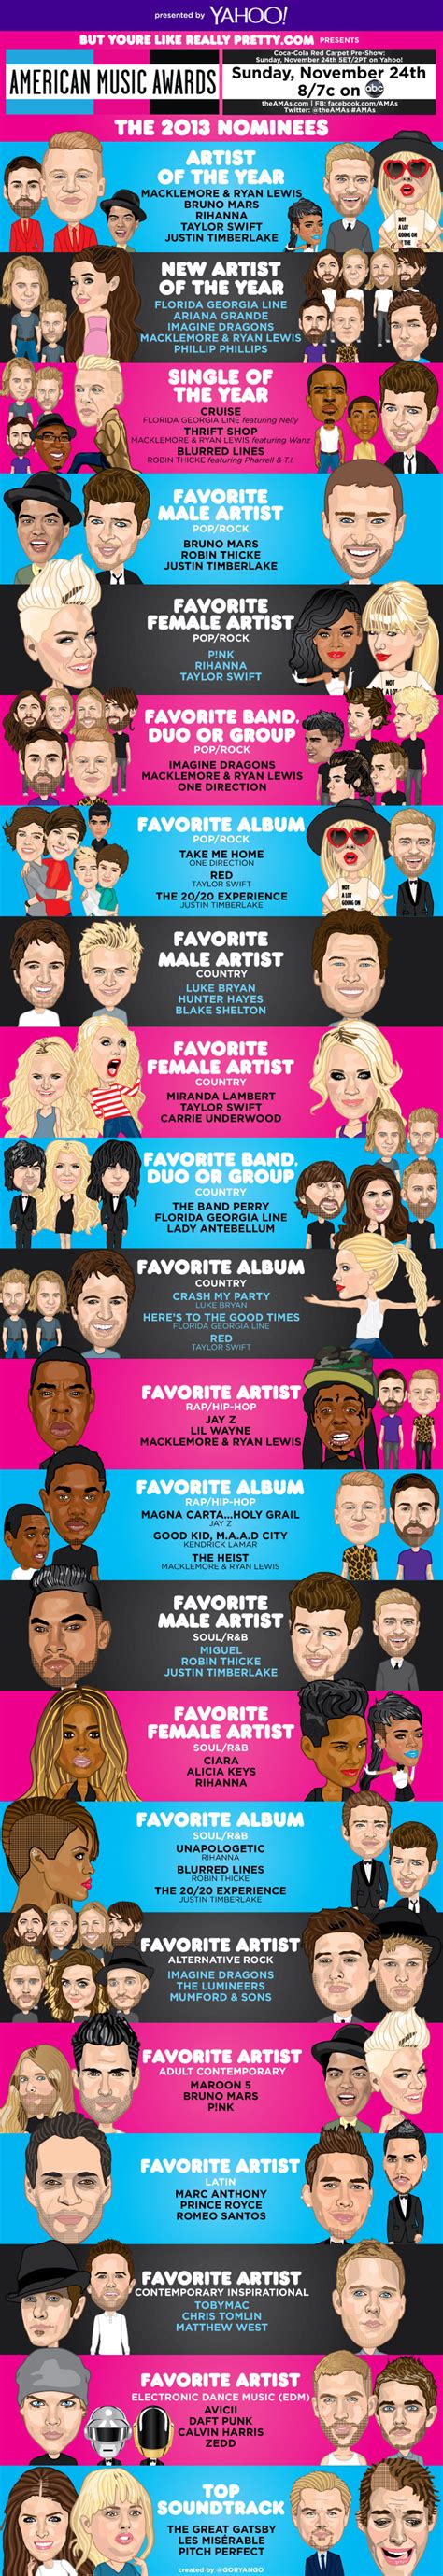 the 2013 ama nominees now in infographic form